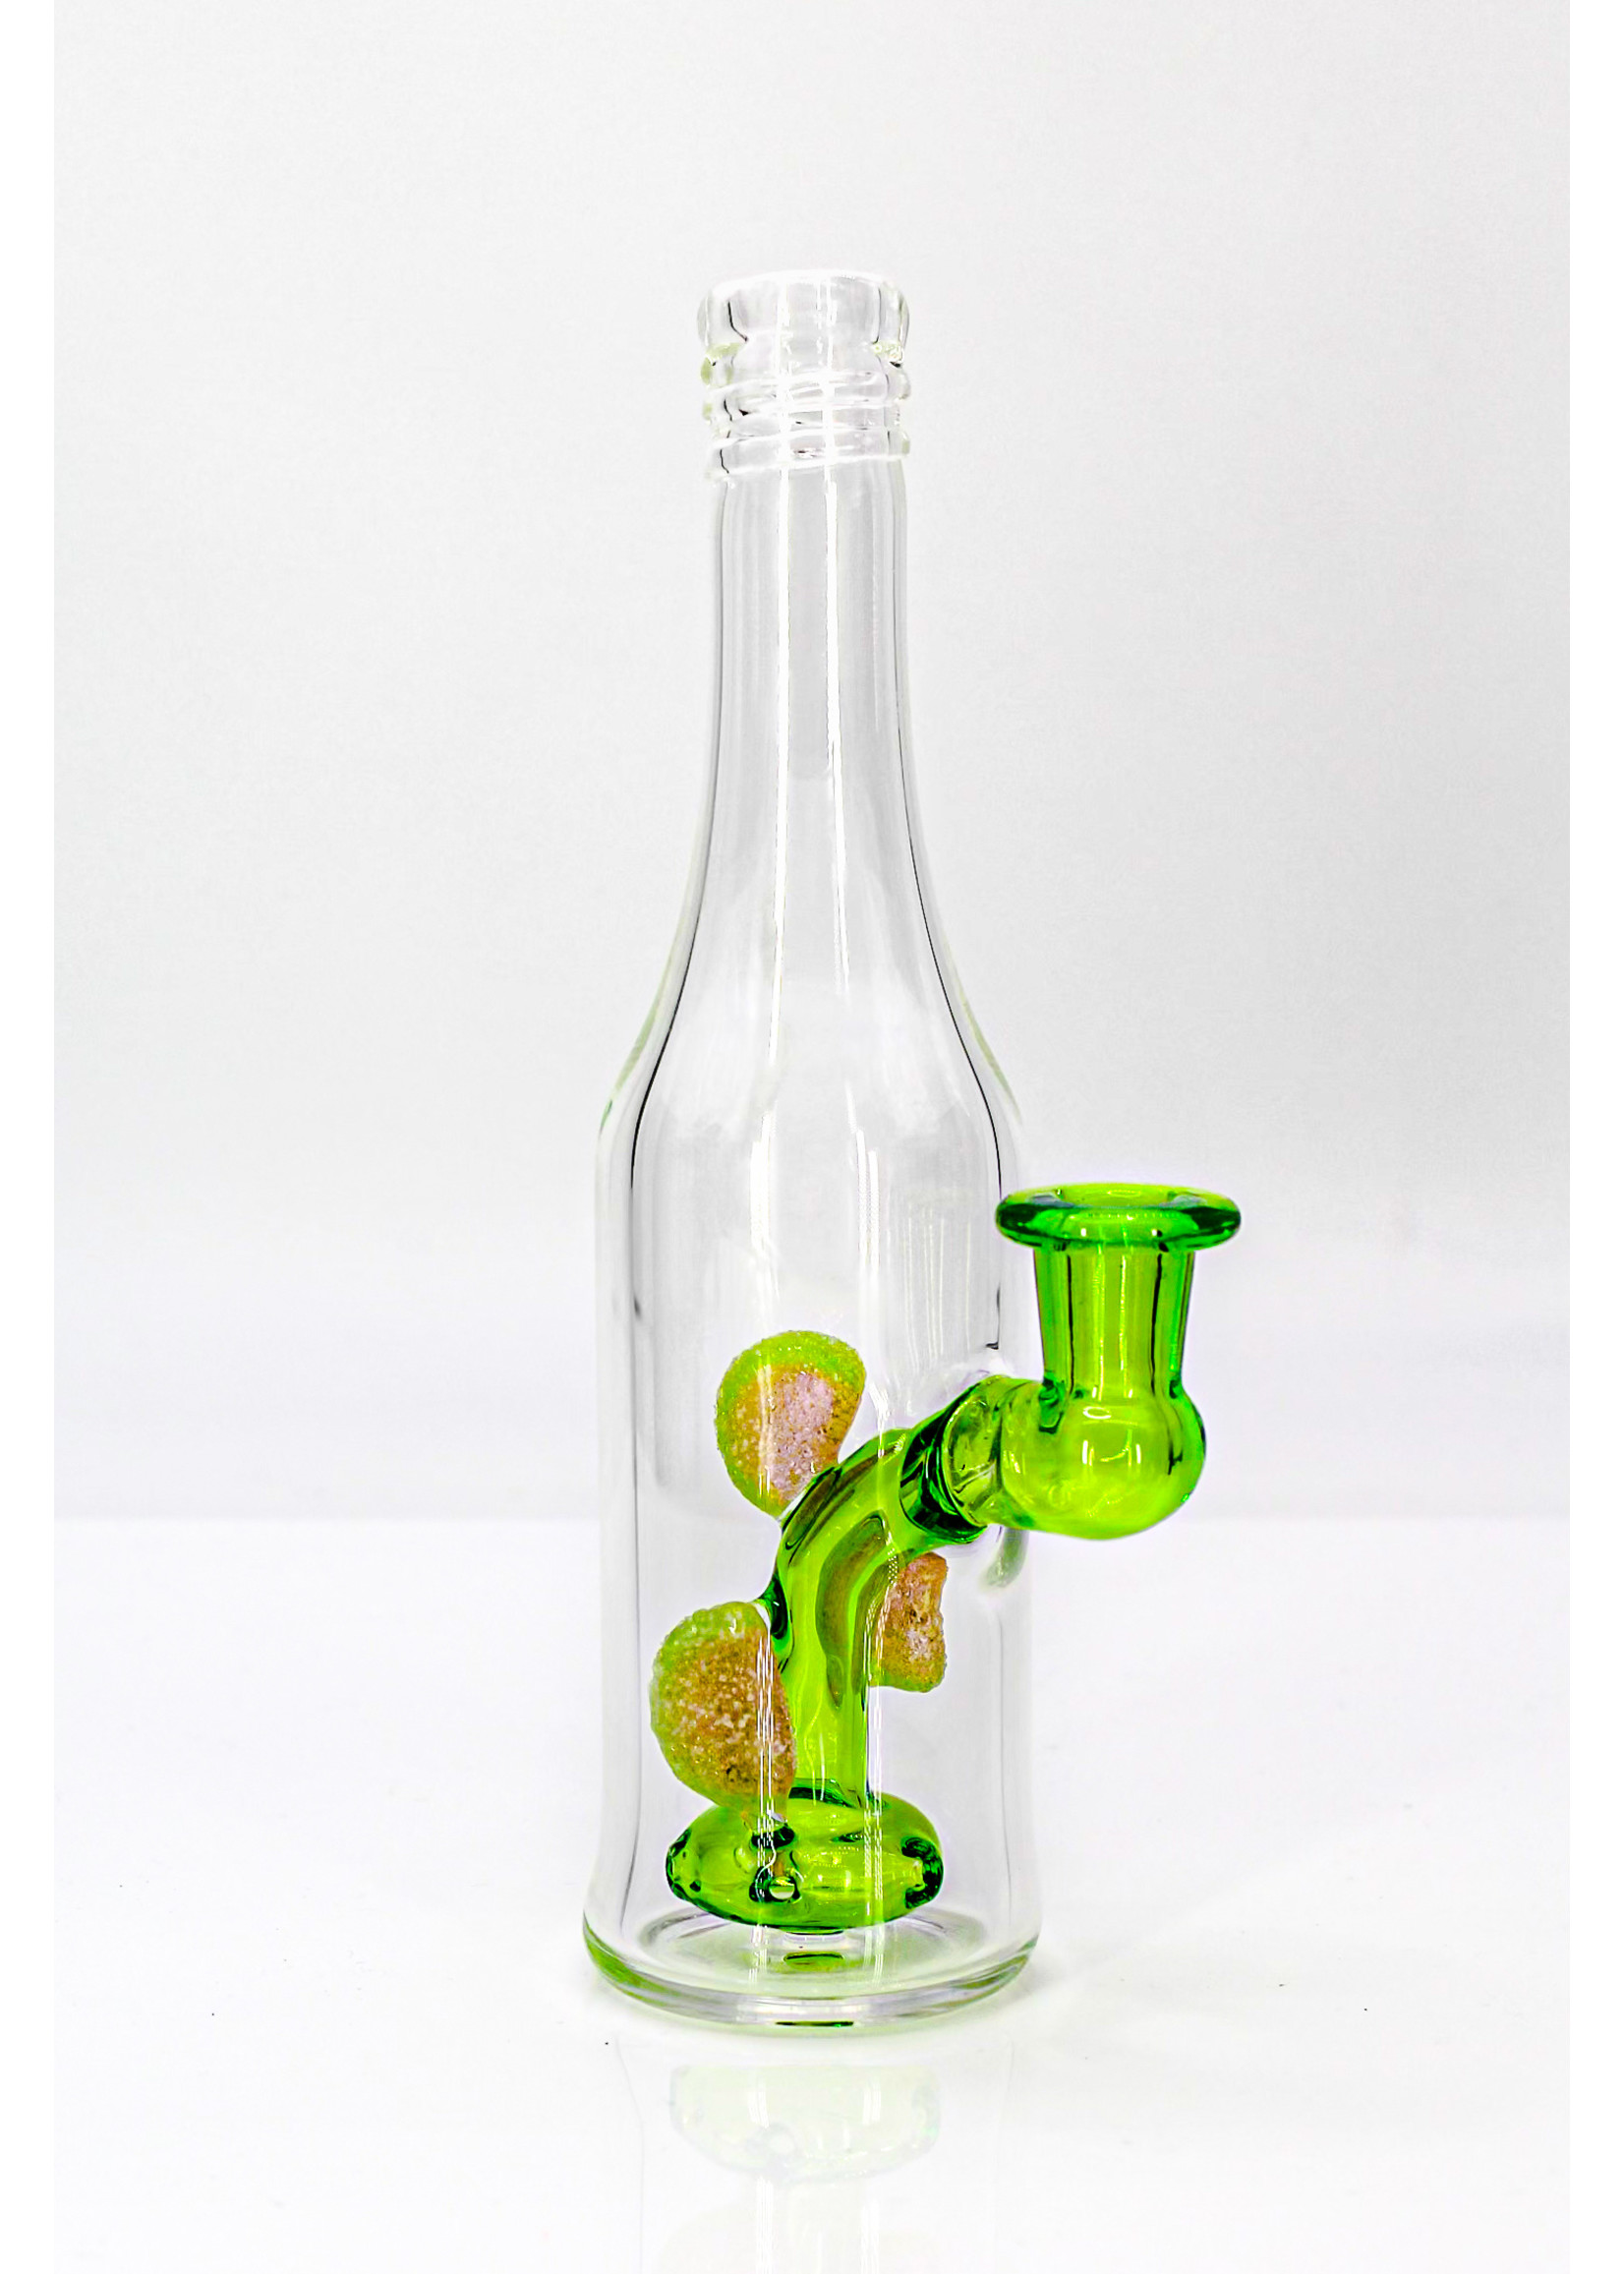 Emperial Glass Emperial Glass Bottle Rig #5